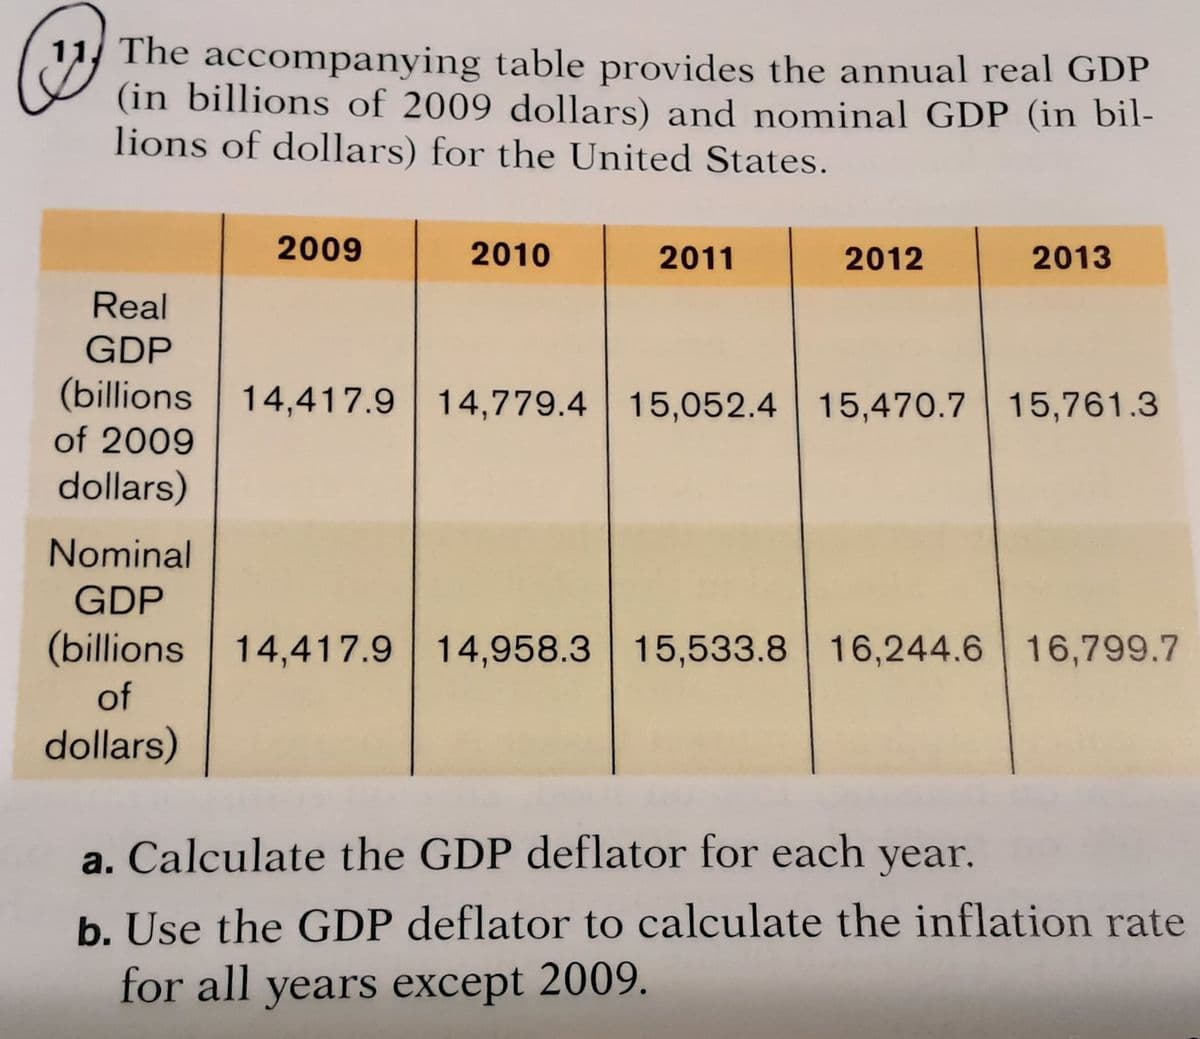 11 The accompanying table provides the annual real GDP
(in billions of 2009 dollars) and nominal GDP (in bil-
lions of dollars) for the United States.
2009
2010
2011
2012
2013
Real
GDP
(billions
14,417.9 14,779.4 15,052.4 15,470.7 15,761.3
of 2009
dollars)
Nominal
GDP
(billions 14,417.9
14,958.3 15,533.8 16,244.6 16,799.7
of
dollars)
a. Calculate the GDP deflator for each year.
b. Use the GDP deflator to calculate the inflation rate
for all years except 2009.
